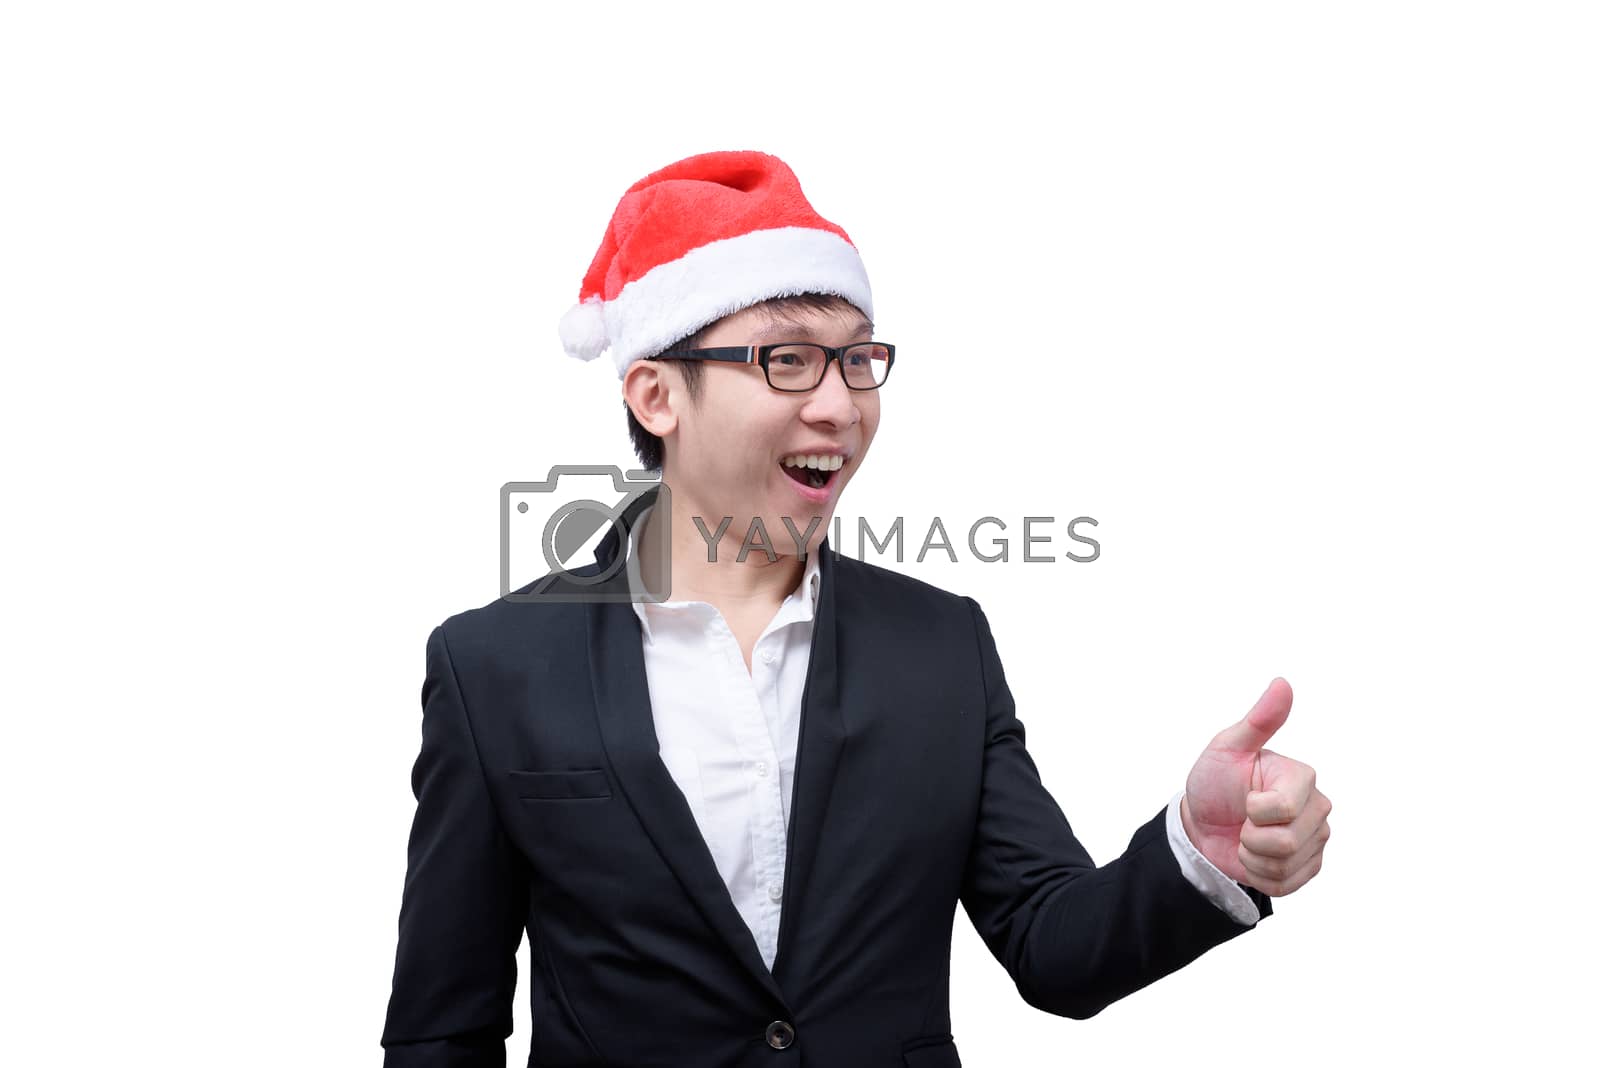 Royalty free image of Business man has thumb show with Christmas festival themes isola by animagesdesign